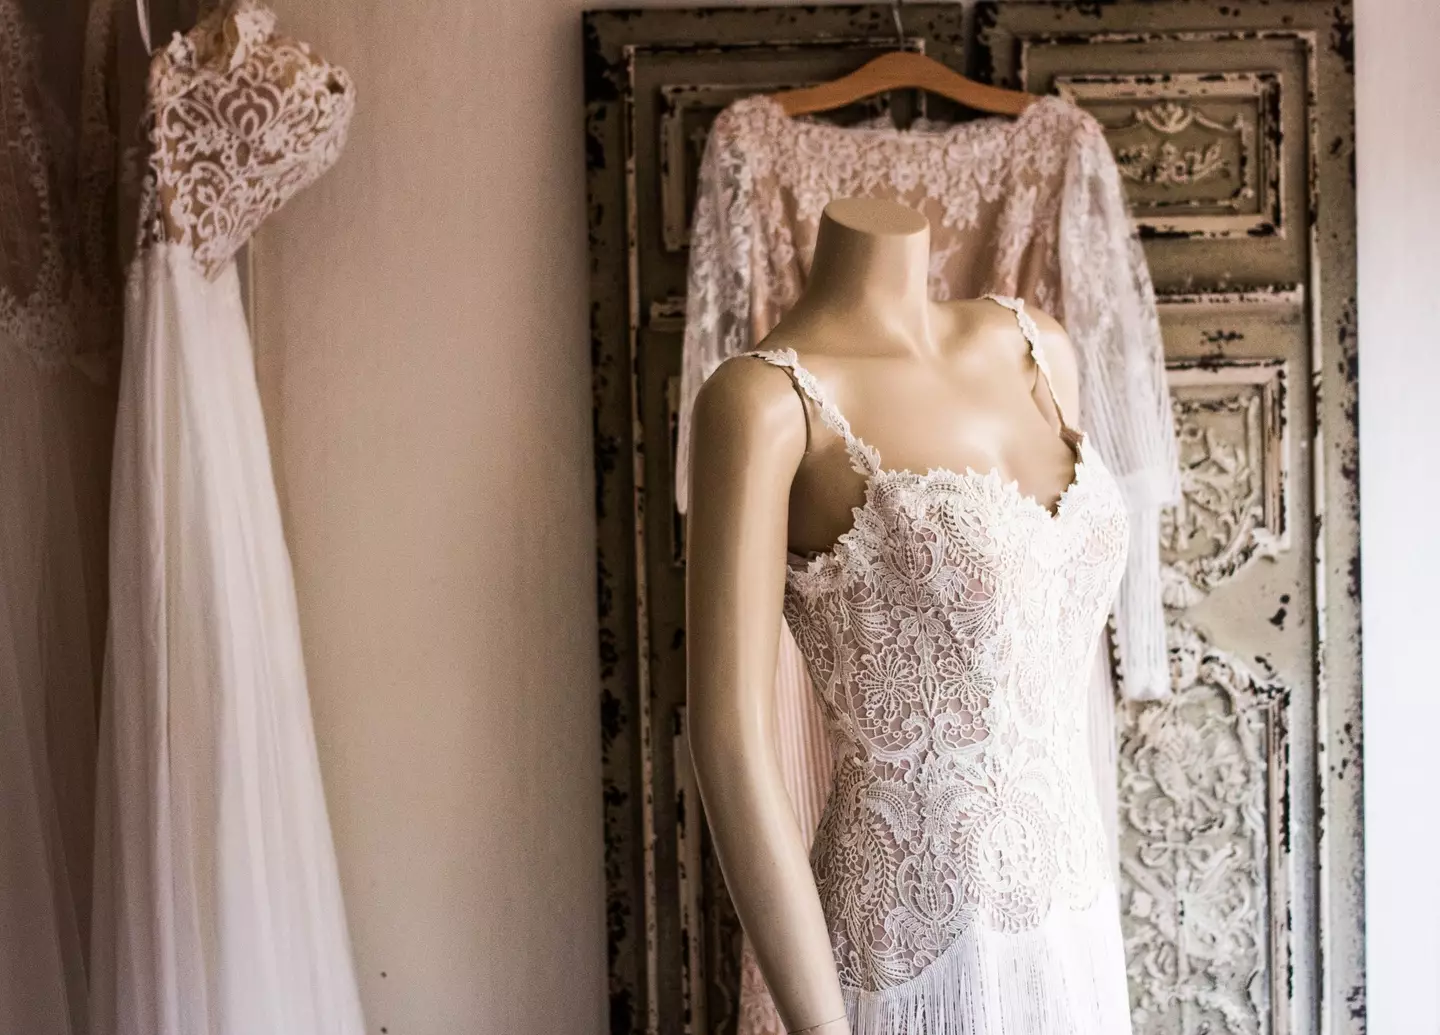 Should the bride say yes to the dress? Or change to keep her in-laws happy? (